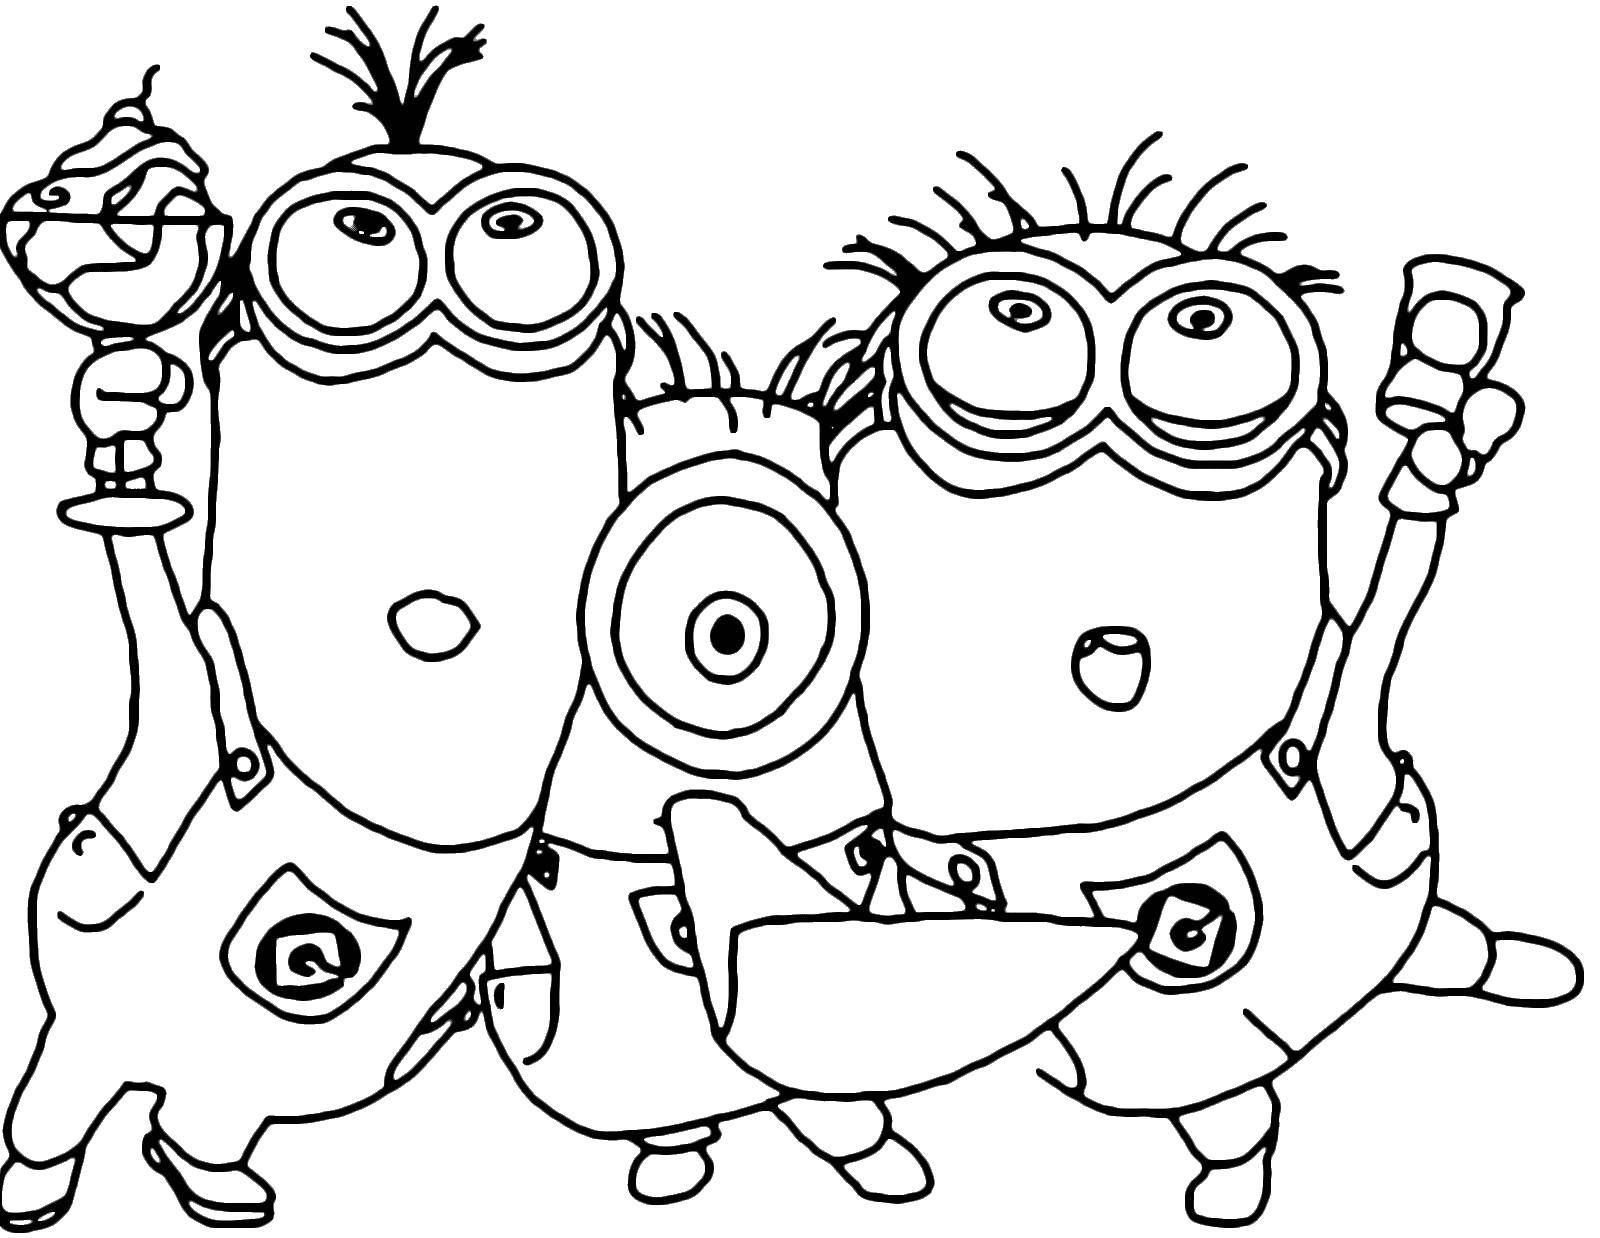 Coloring Minions celebrate. Category the minions. Tags:  the minions.